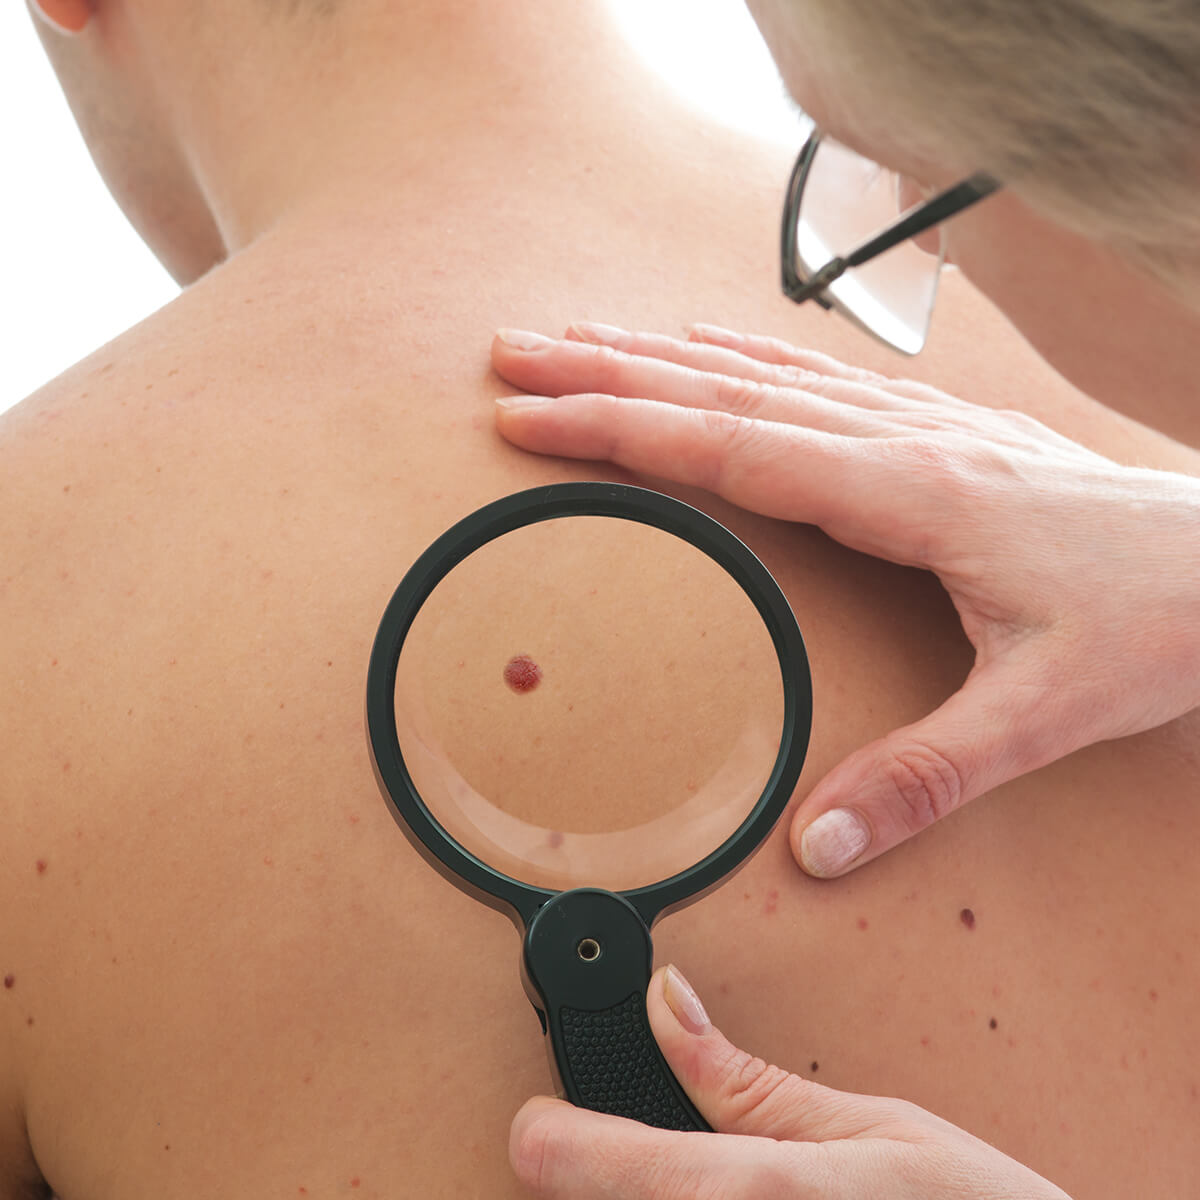 Mole Removal Methods at Dermatology & Cosmetic Laser Center in Huntington NY Area